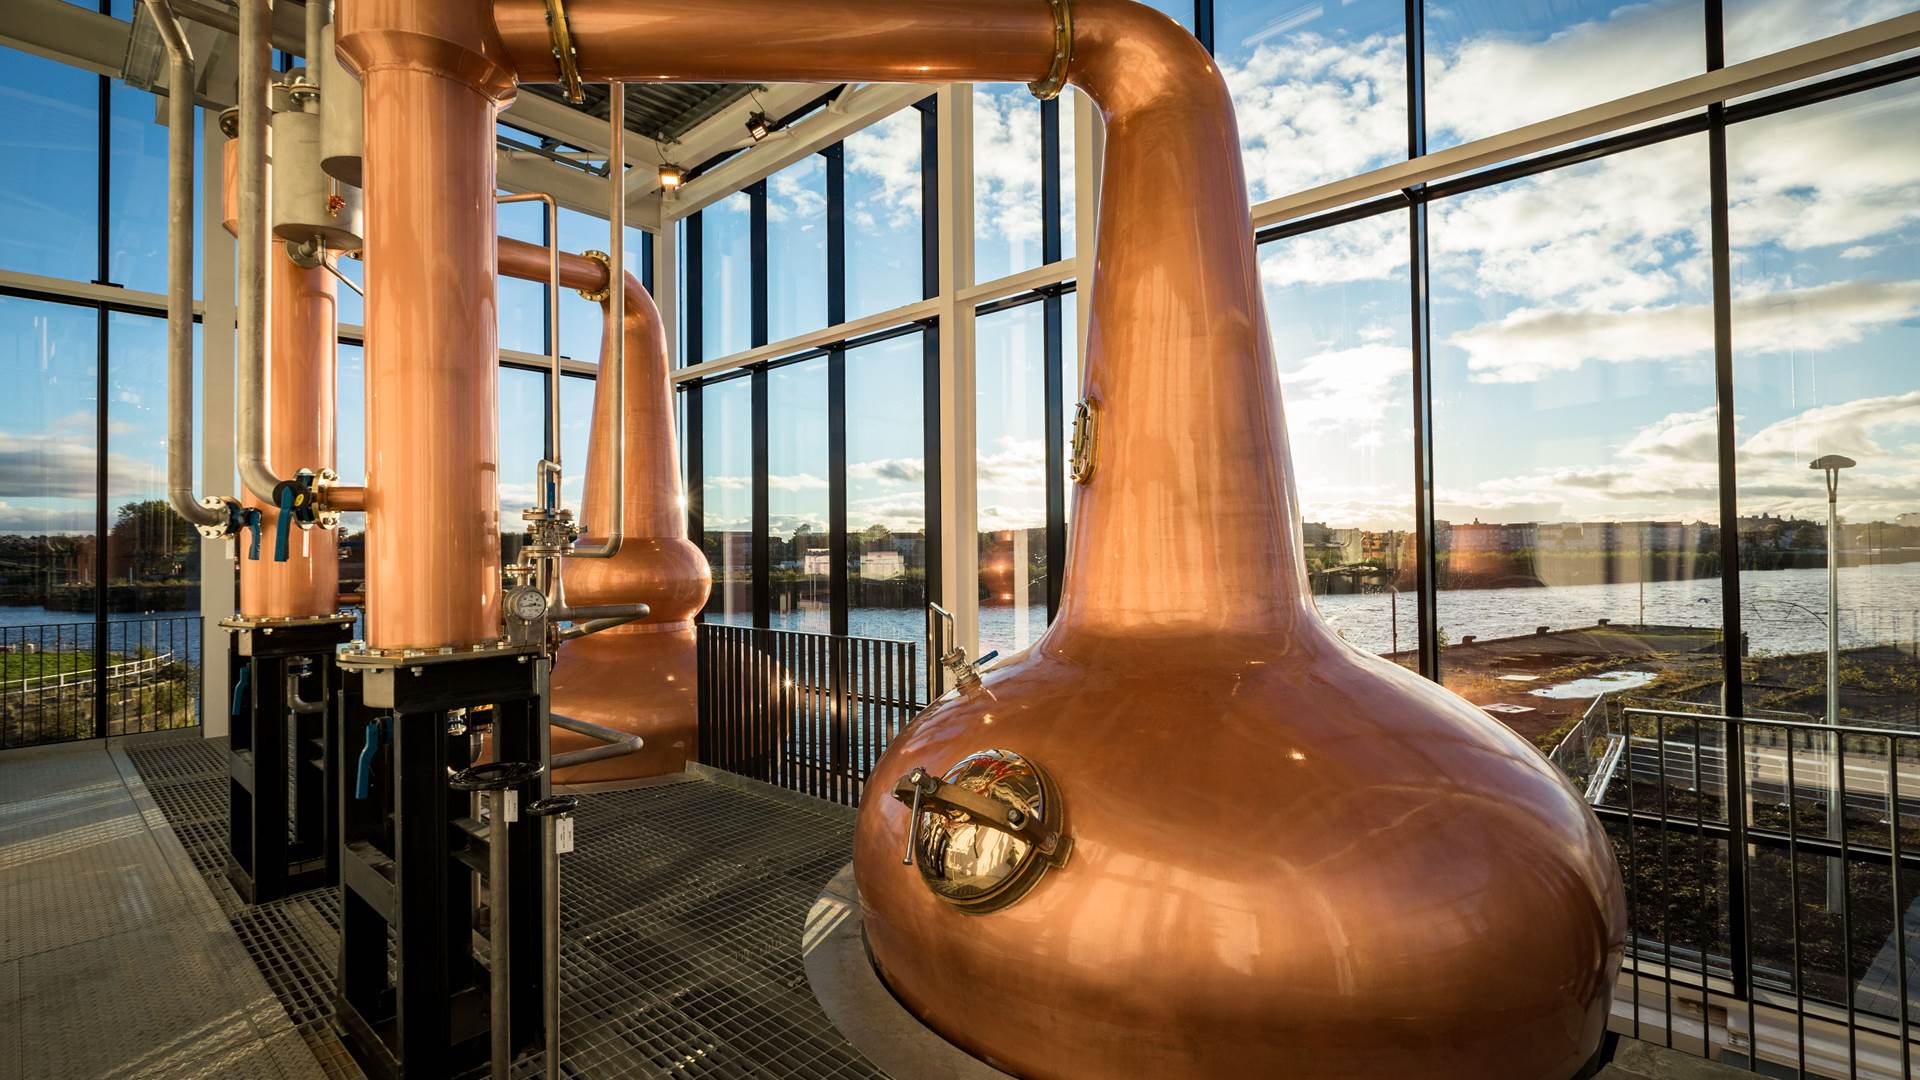 Two Clydeside Copper Stills with blue sky background